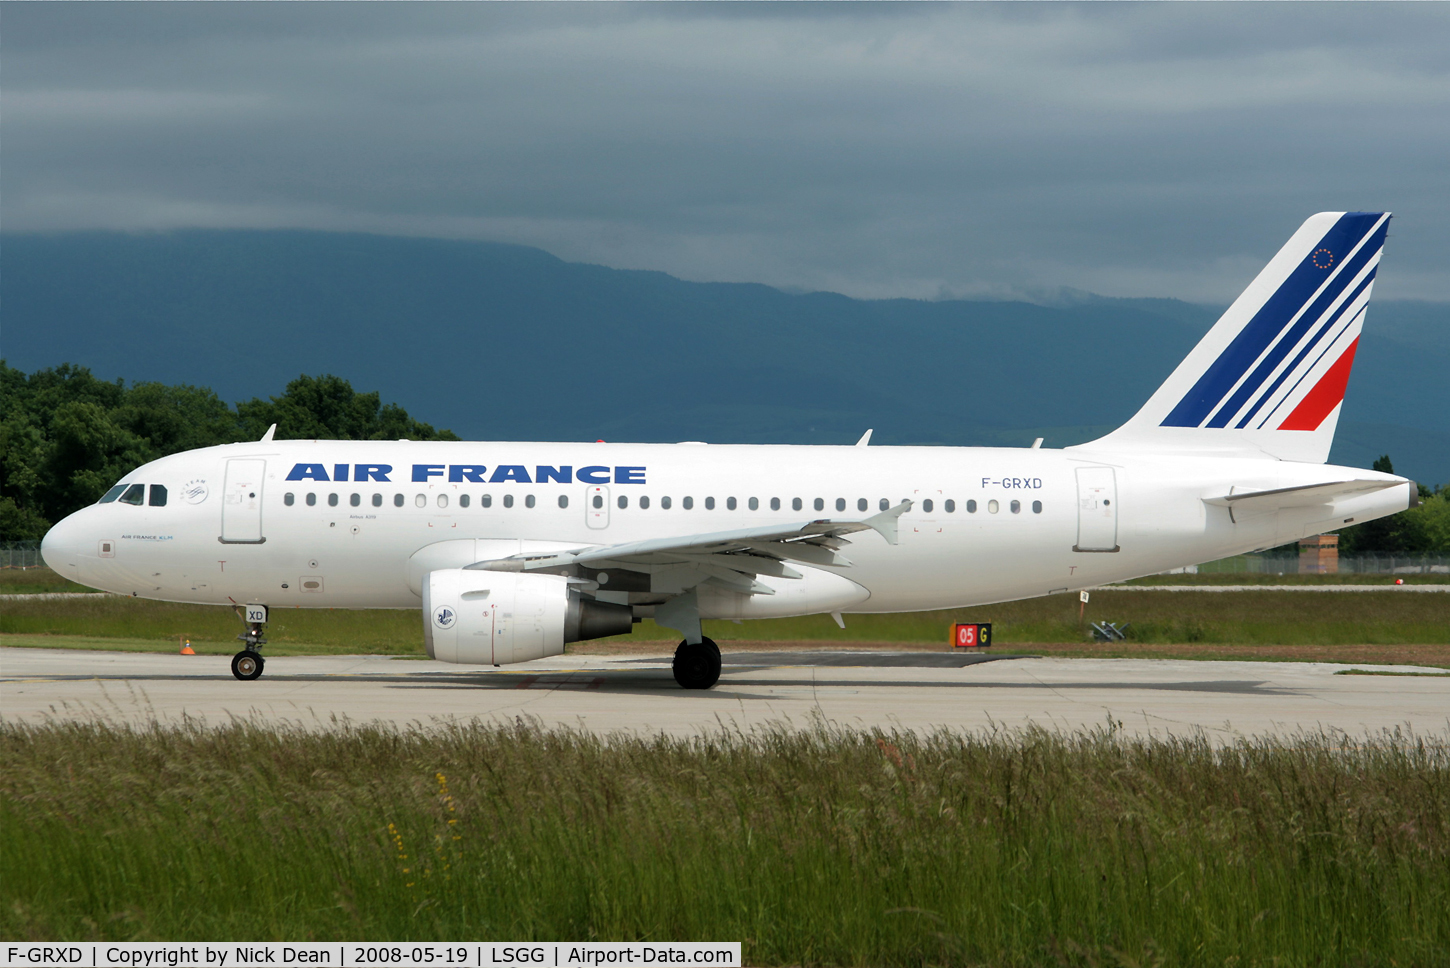 F-GRXD, 2002 Airbus A319-111 C/N 1699, /